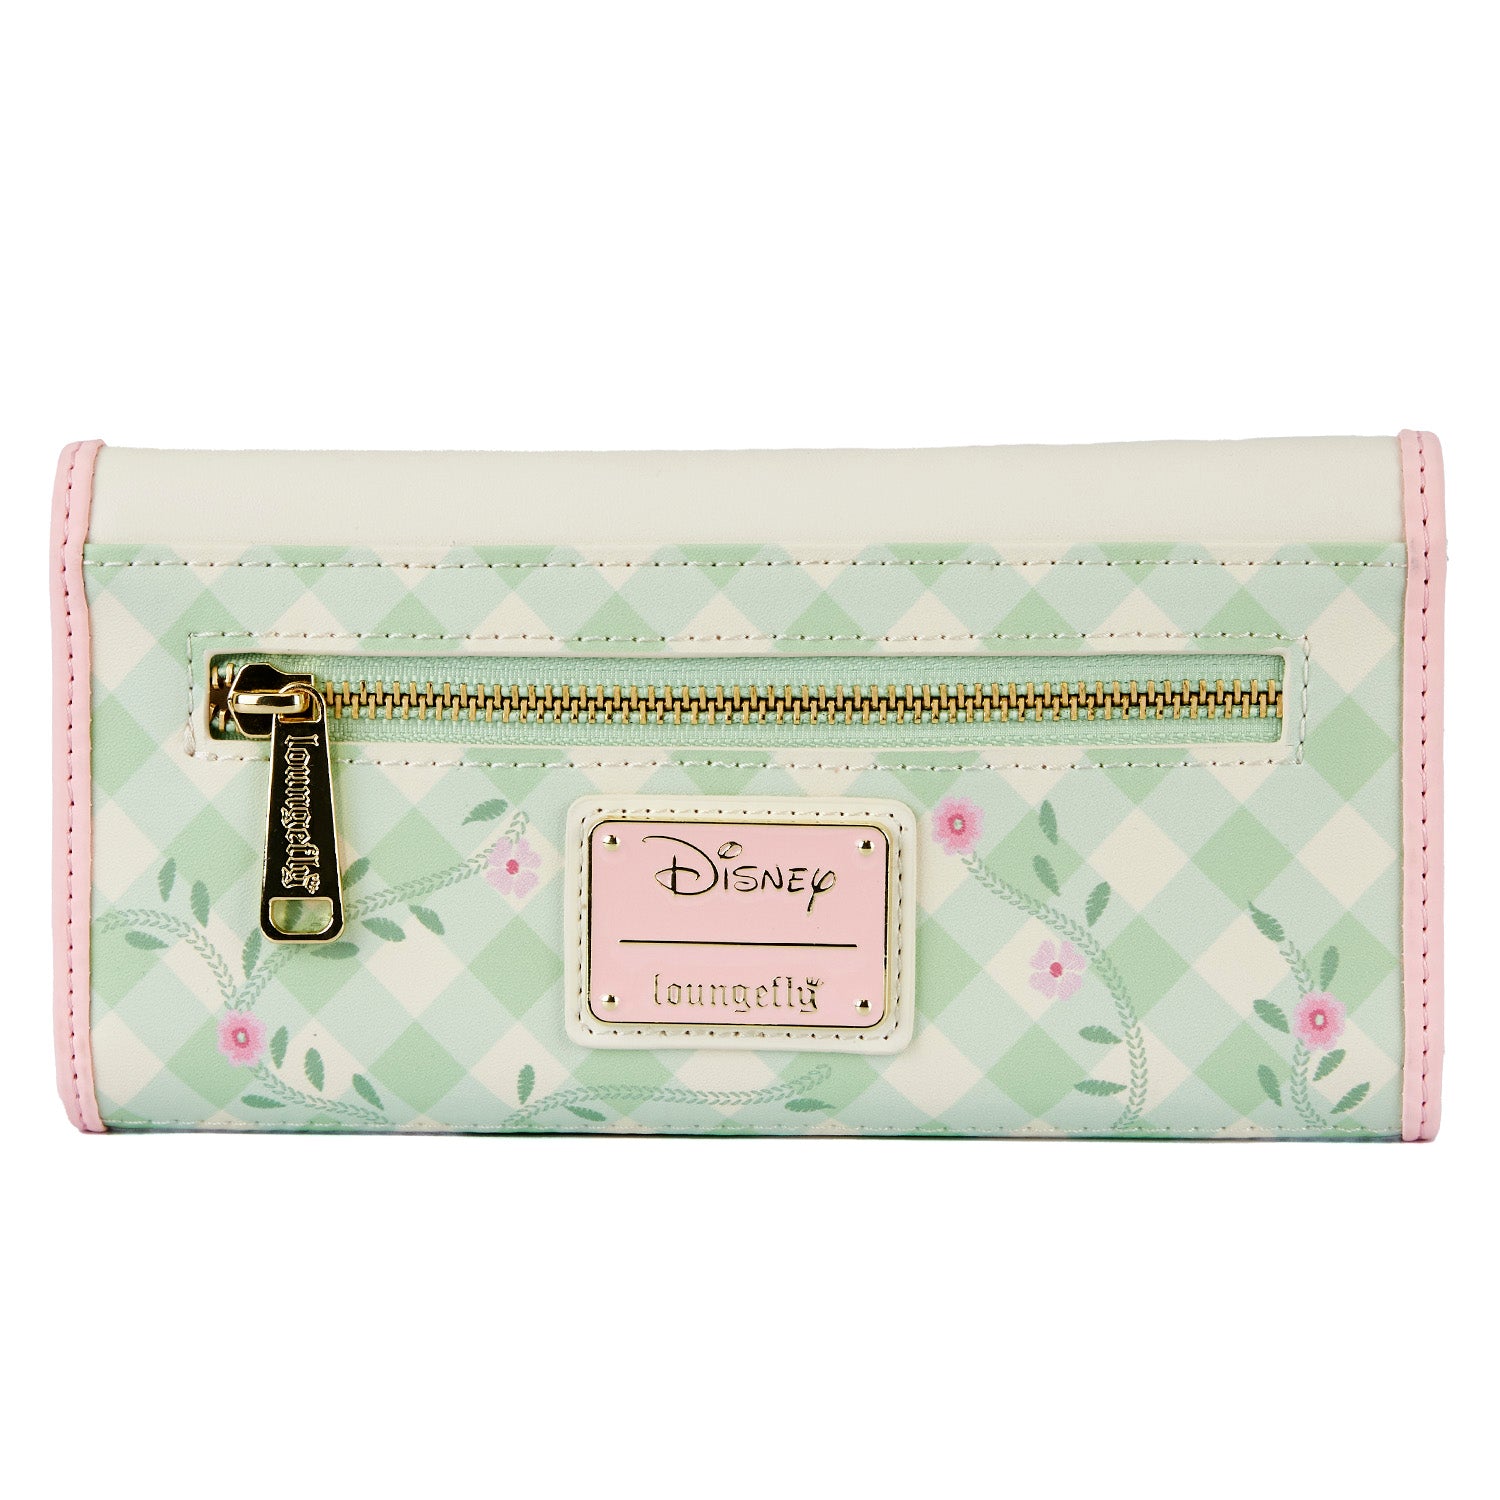 Toys Story wallet Pink Trifold